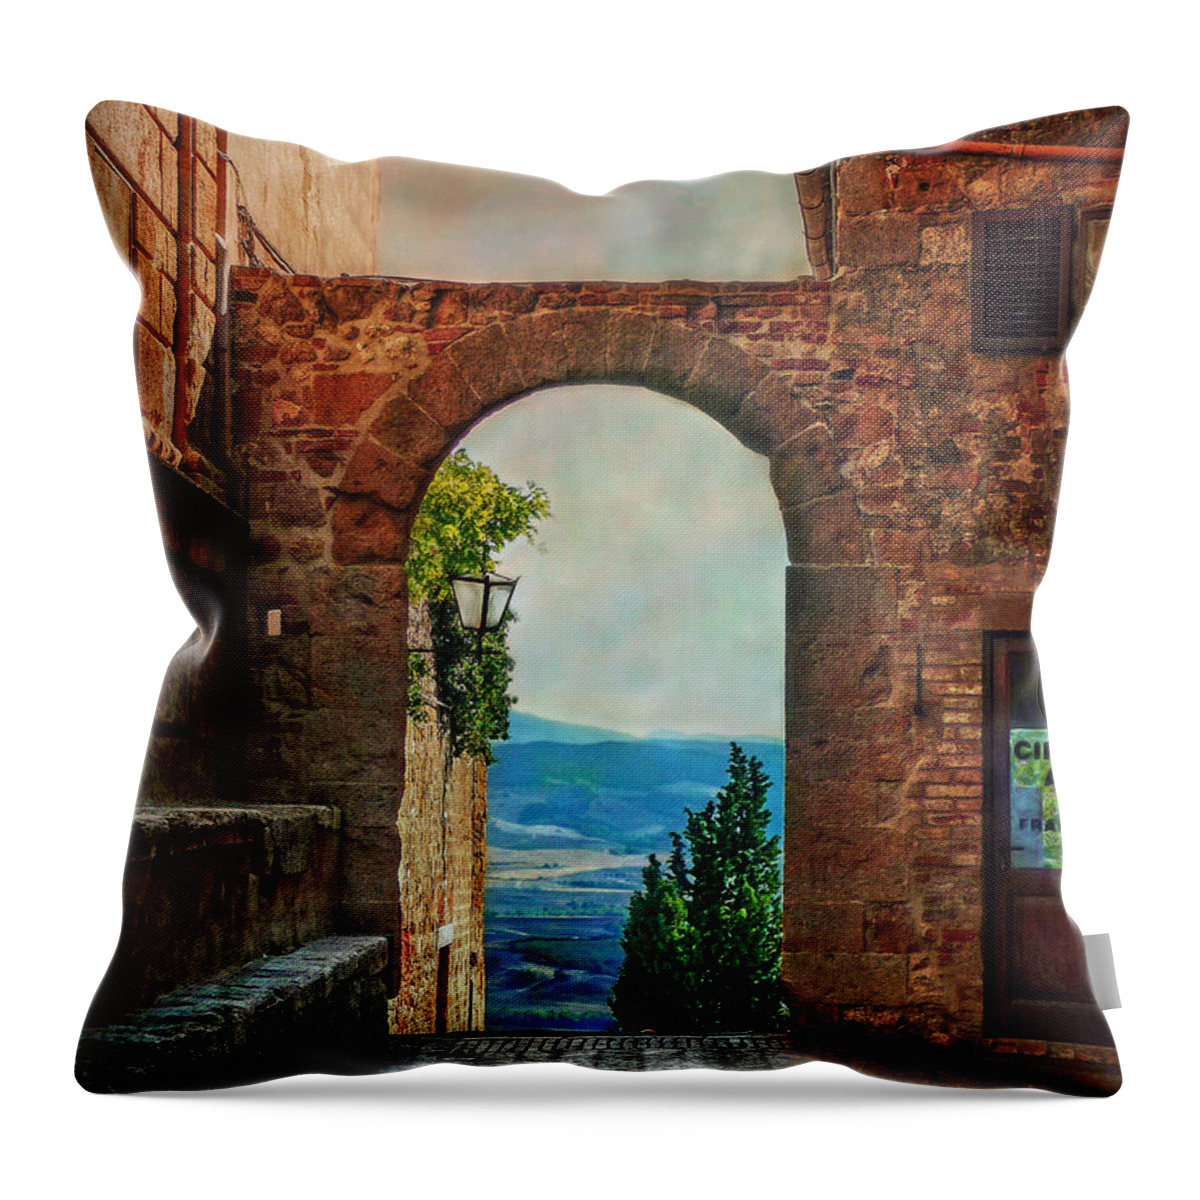 Italy Throw Pillow featuring the photograph Etruscan Arch by Hanny Heim